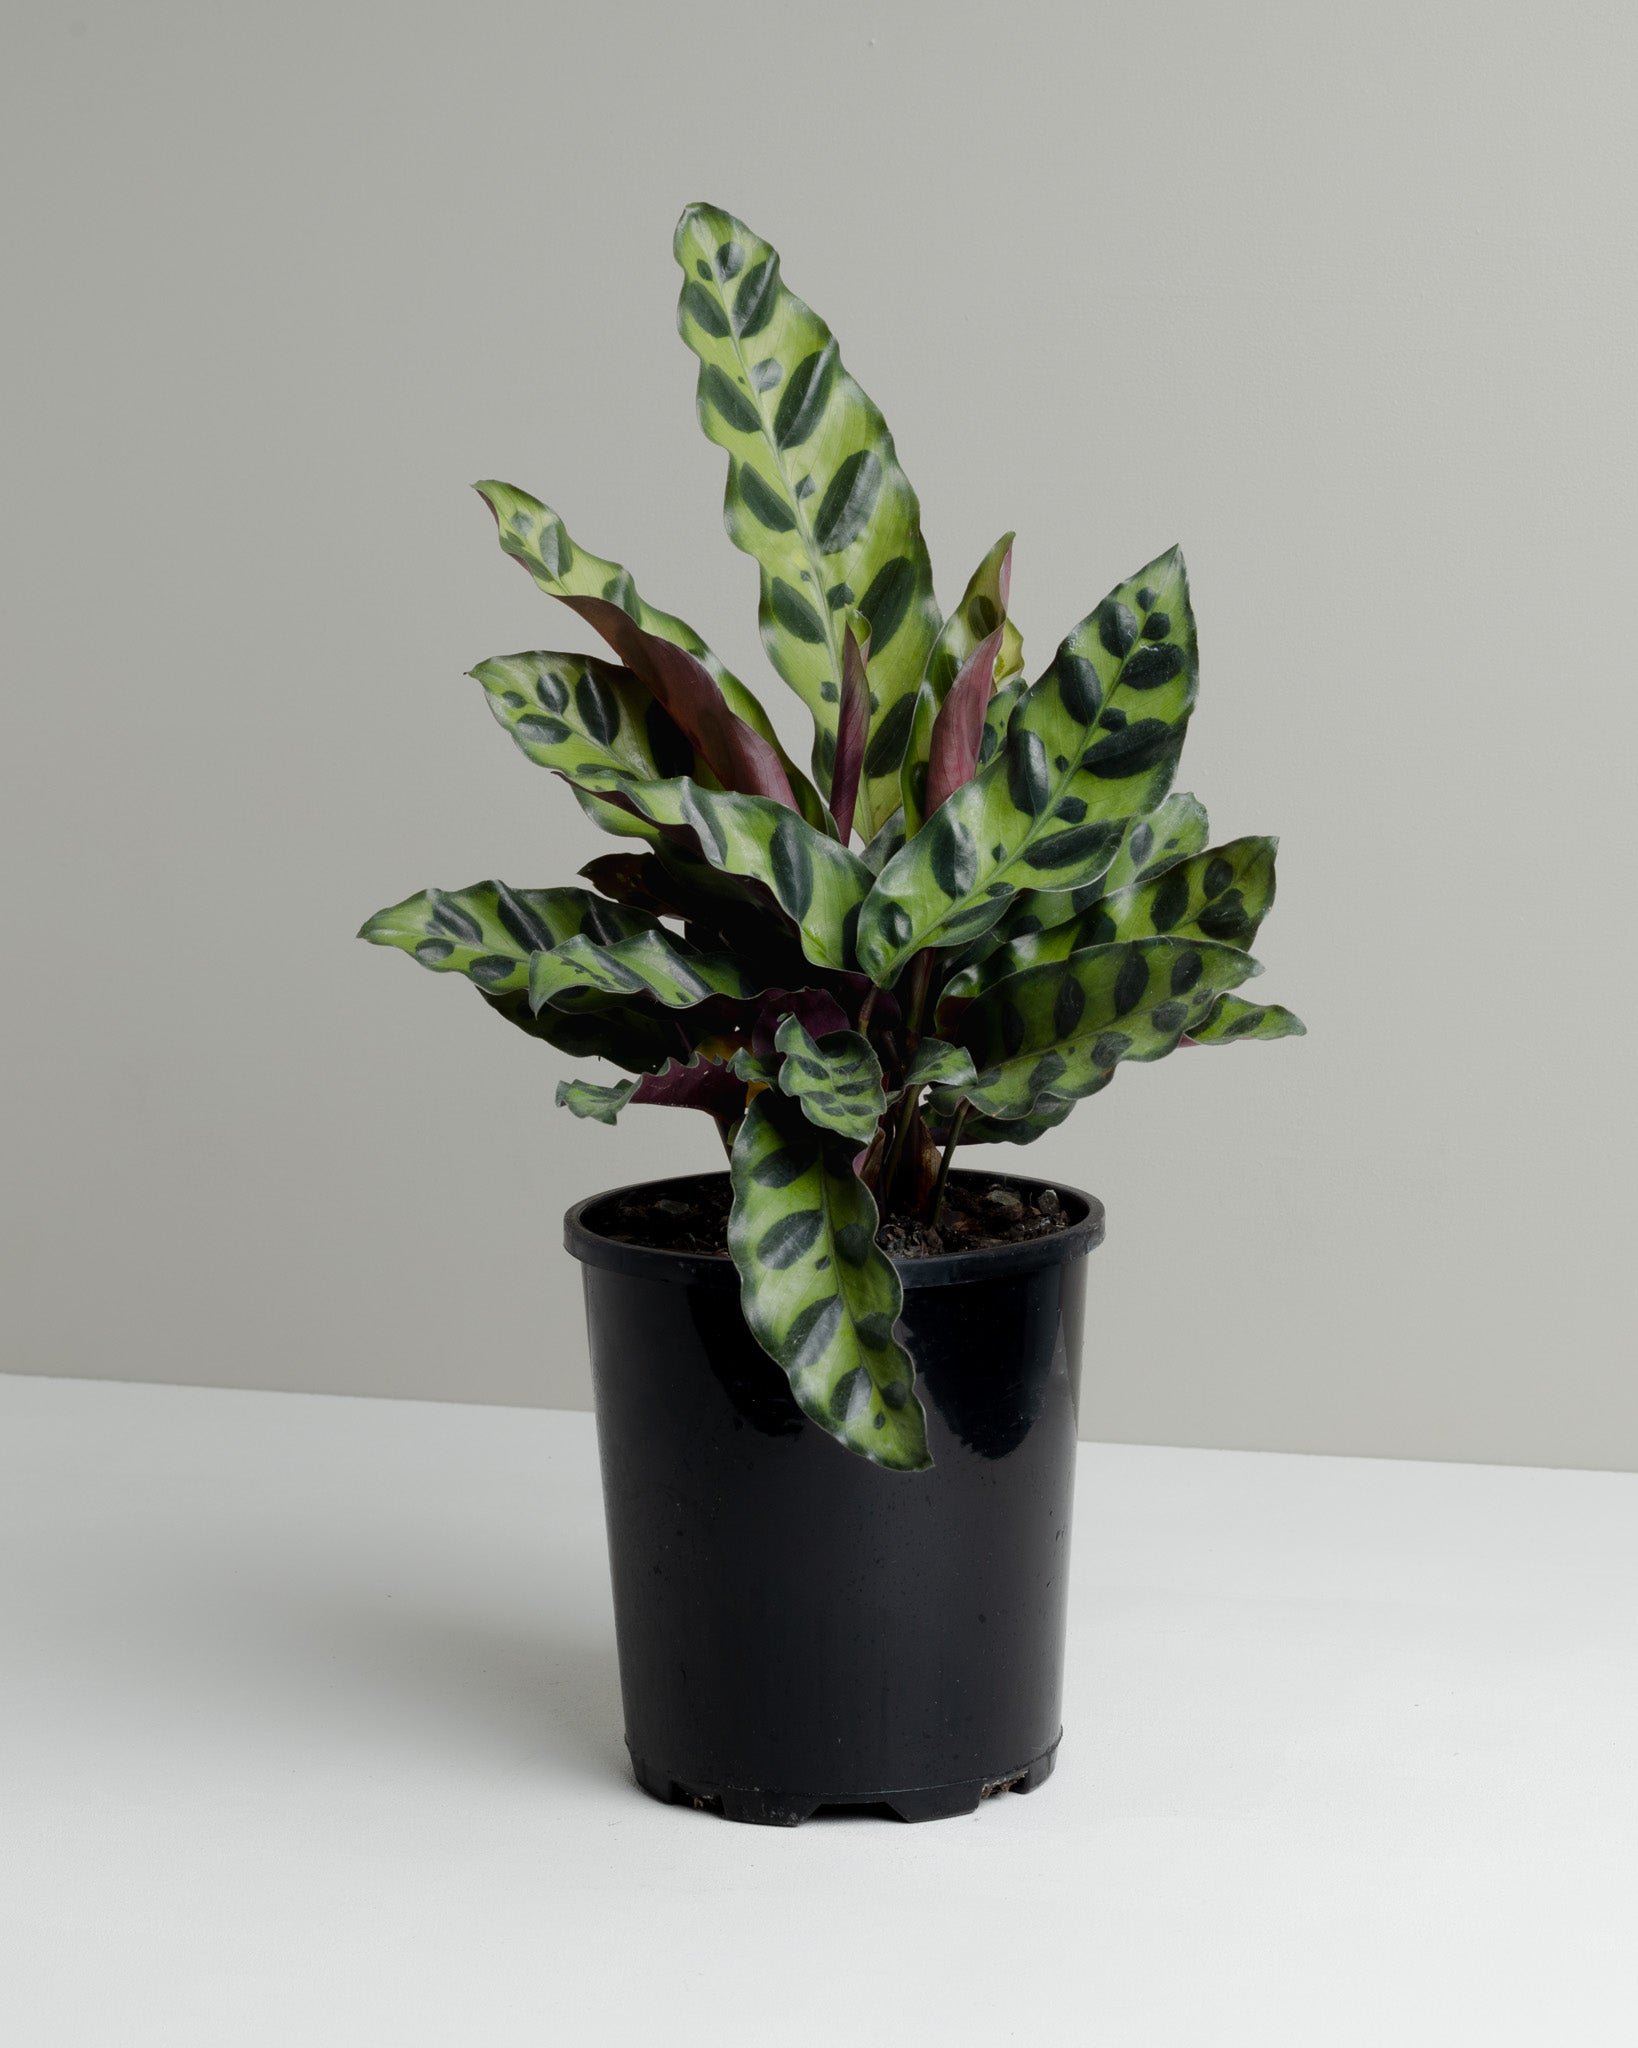 Calathea Insignis, Rattlesnake plant. Buy indoor plants online and have it delivered to your door.